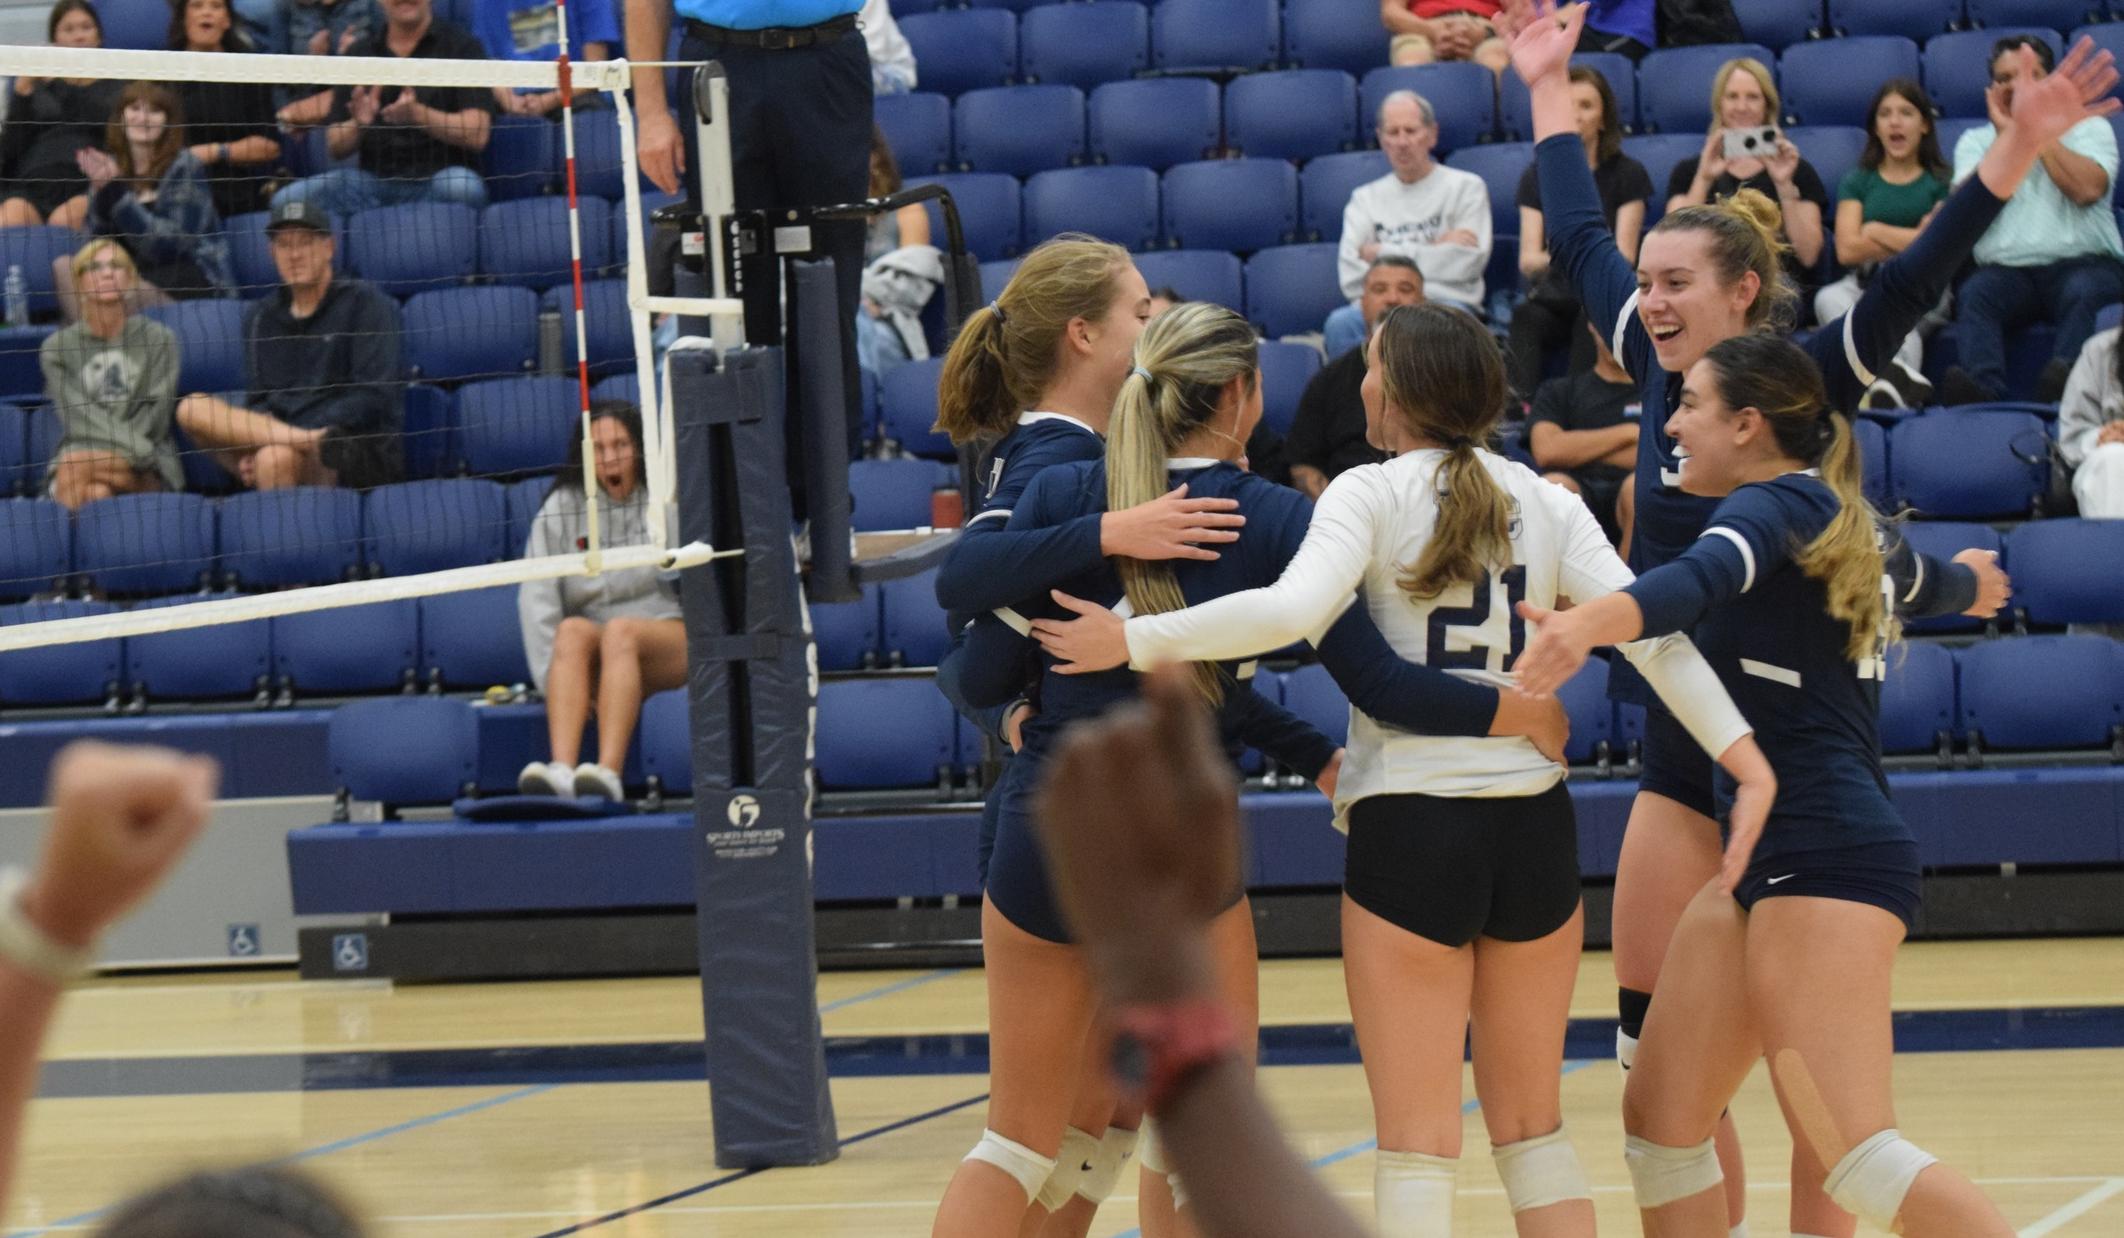 Women's volleyball team scores most lopsided win of year